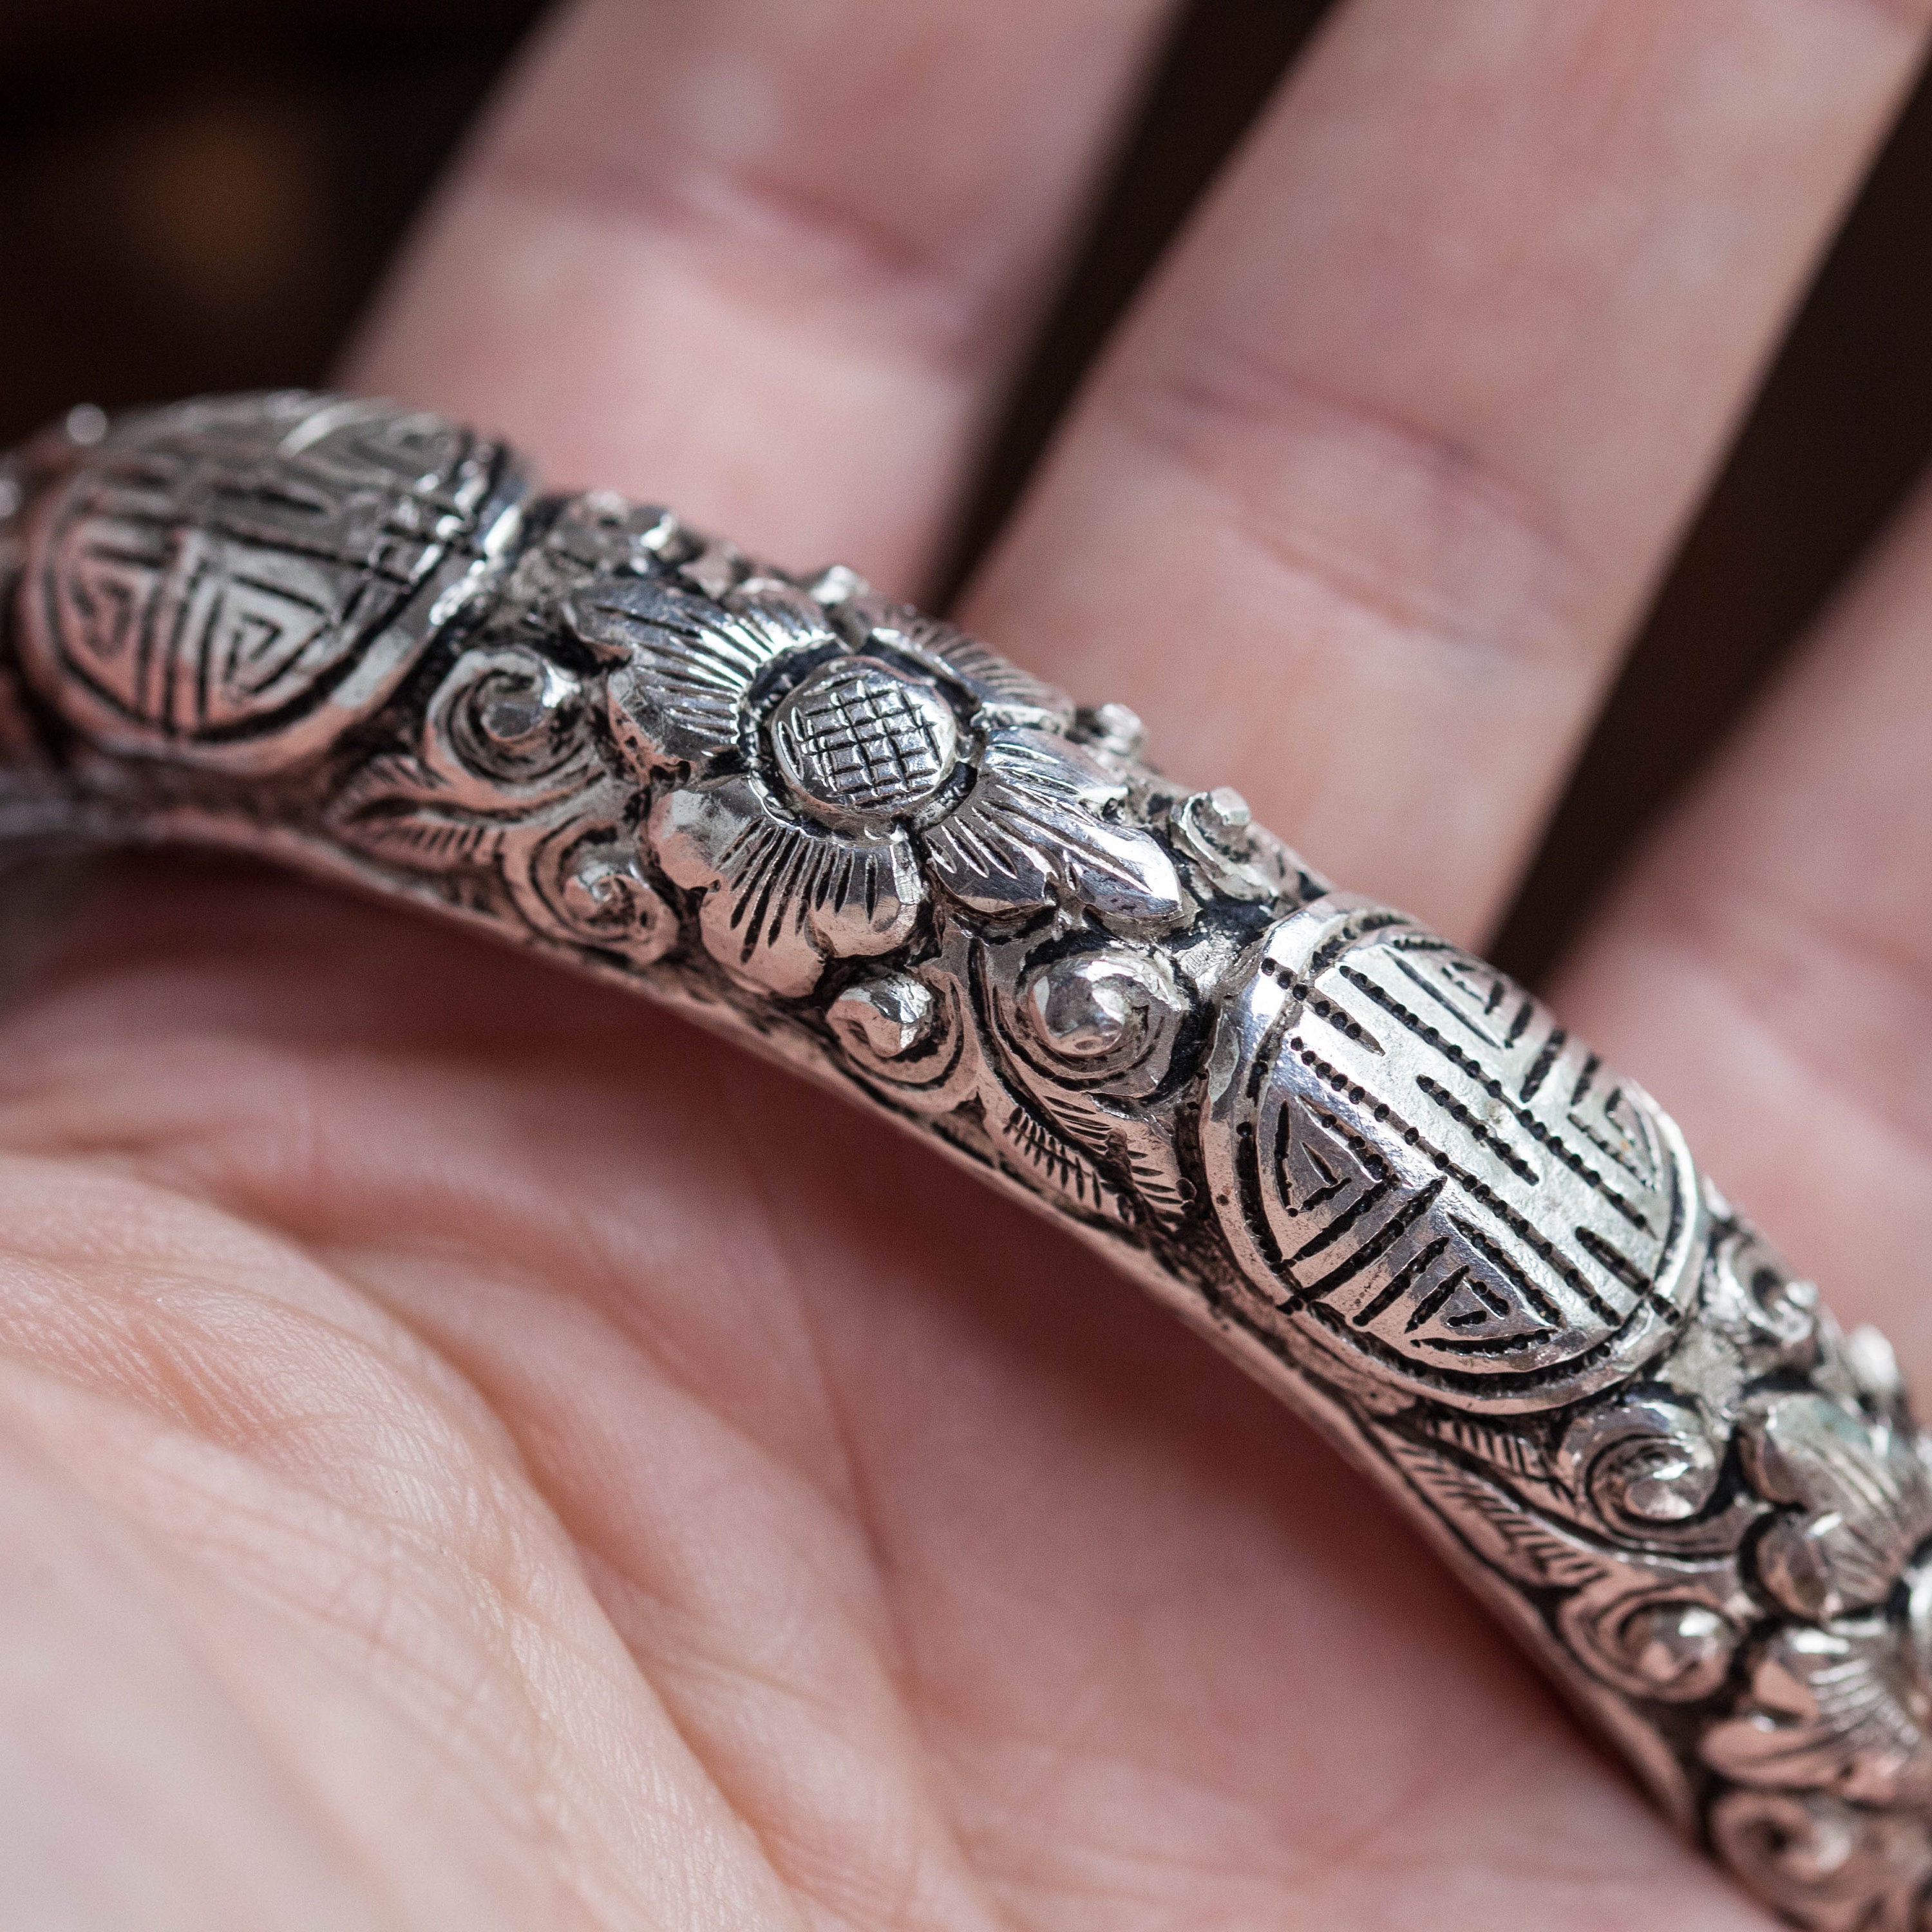 Busacca Gallery: 19th century antique Chinese bamboo and silver bracelet